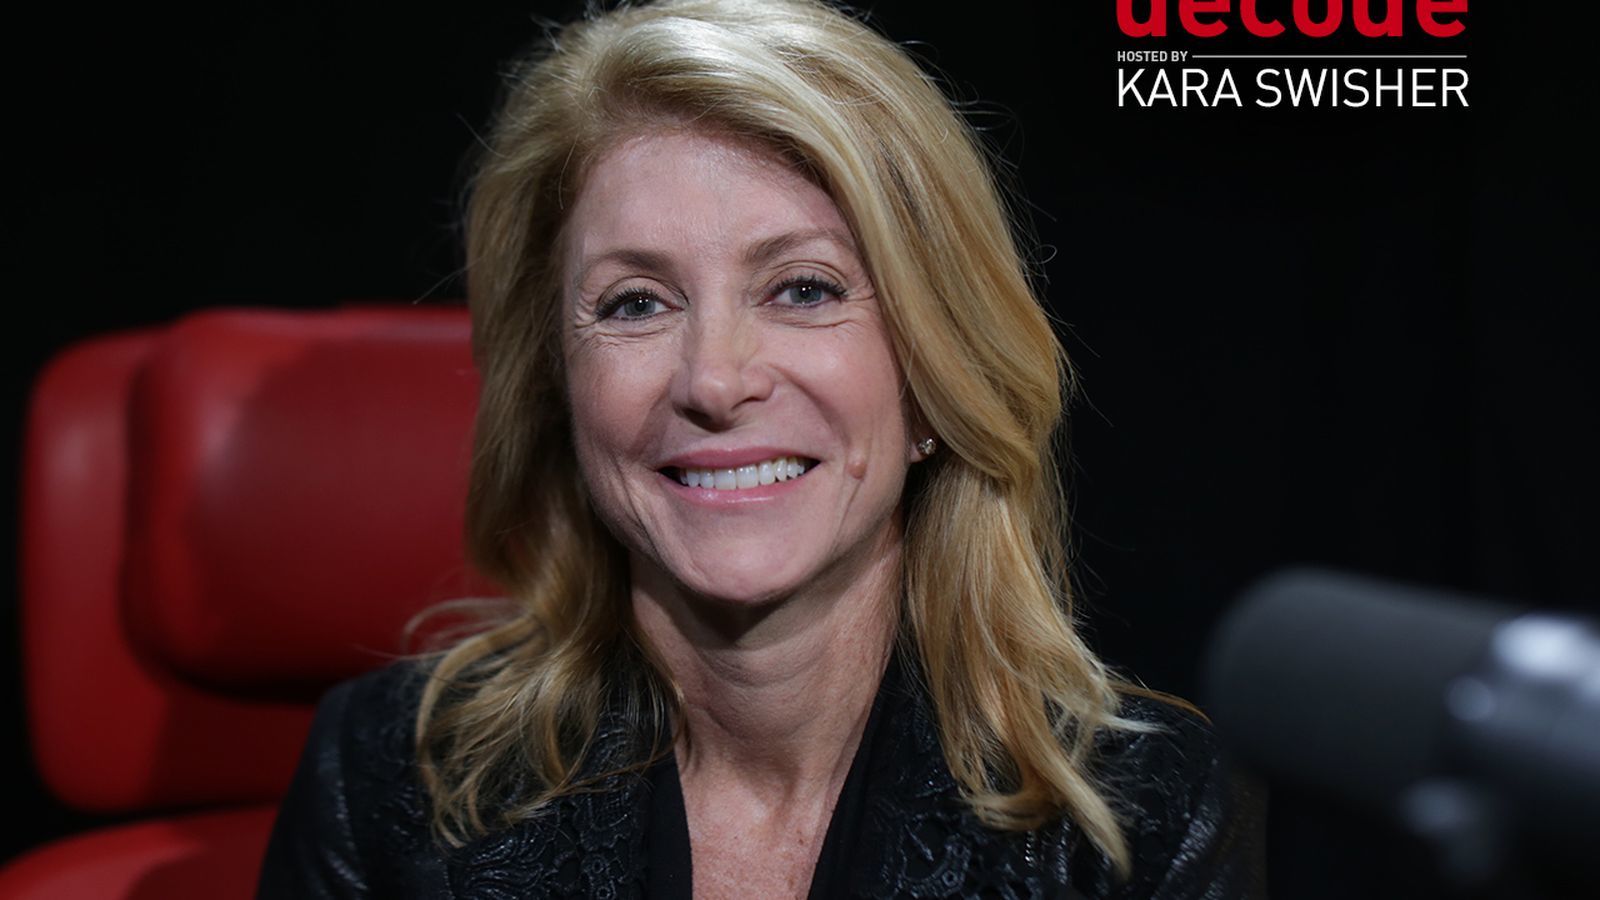 'We will not be silenced': Filibuster-famous Wendy Davis says women must speak up to fight sexism